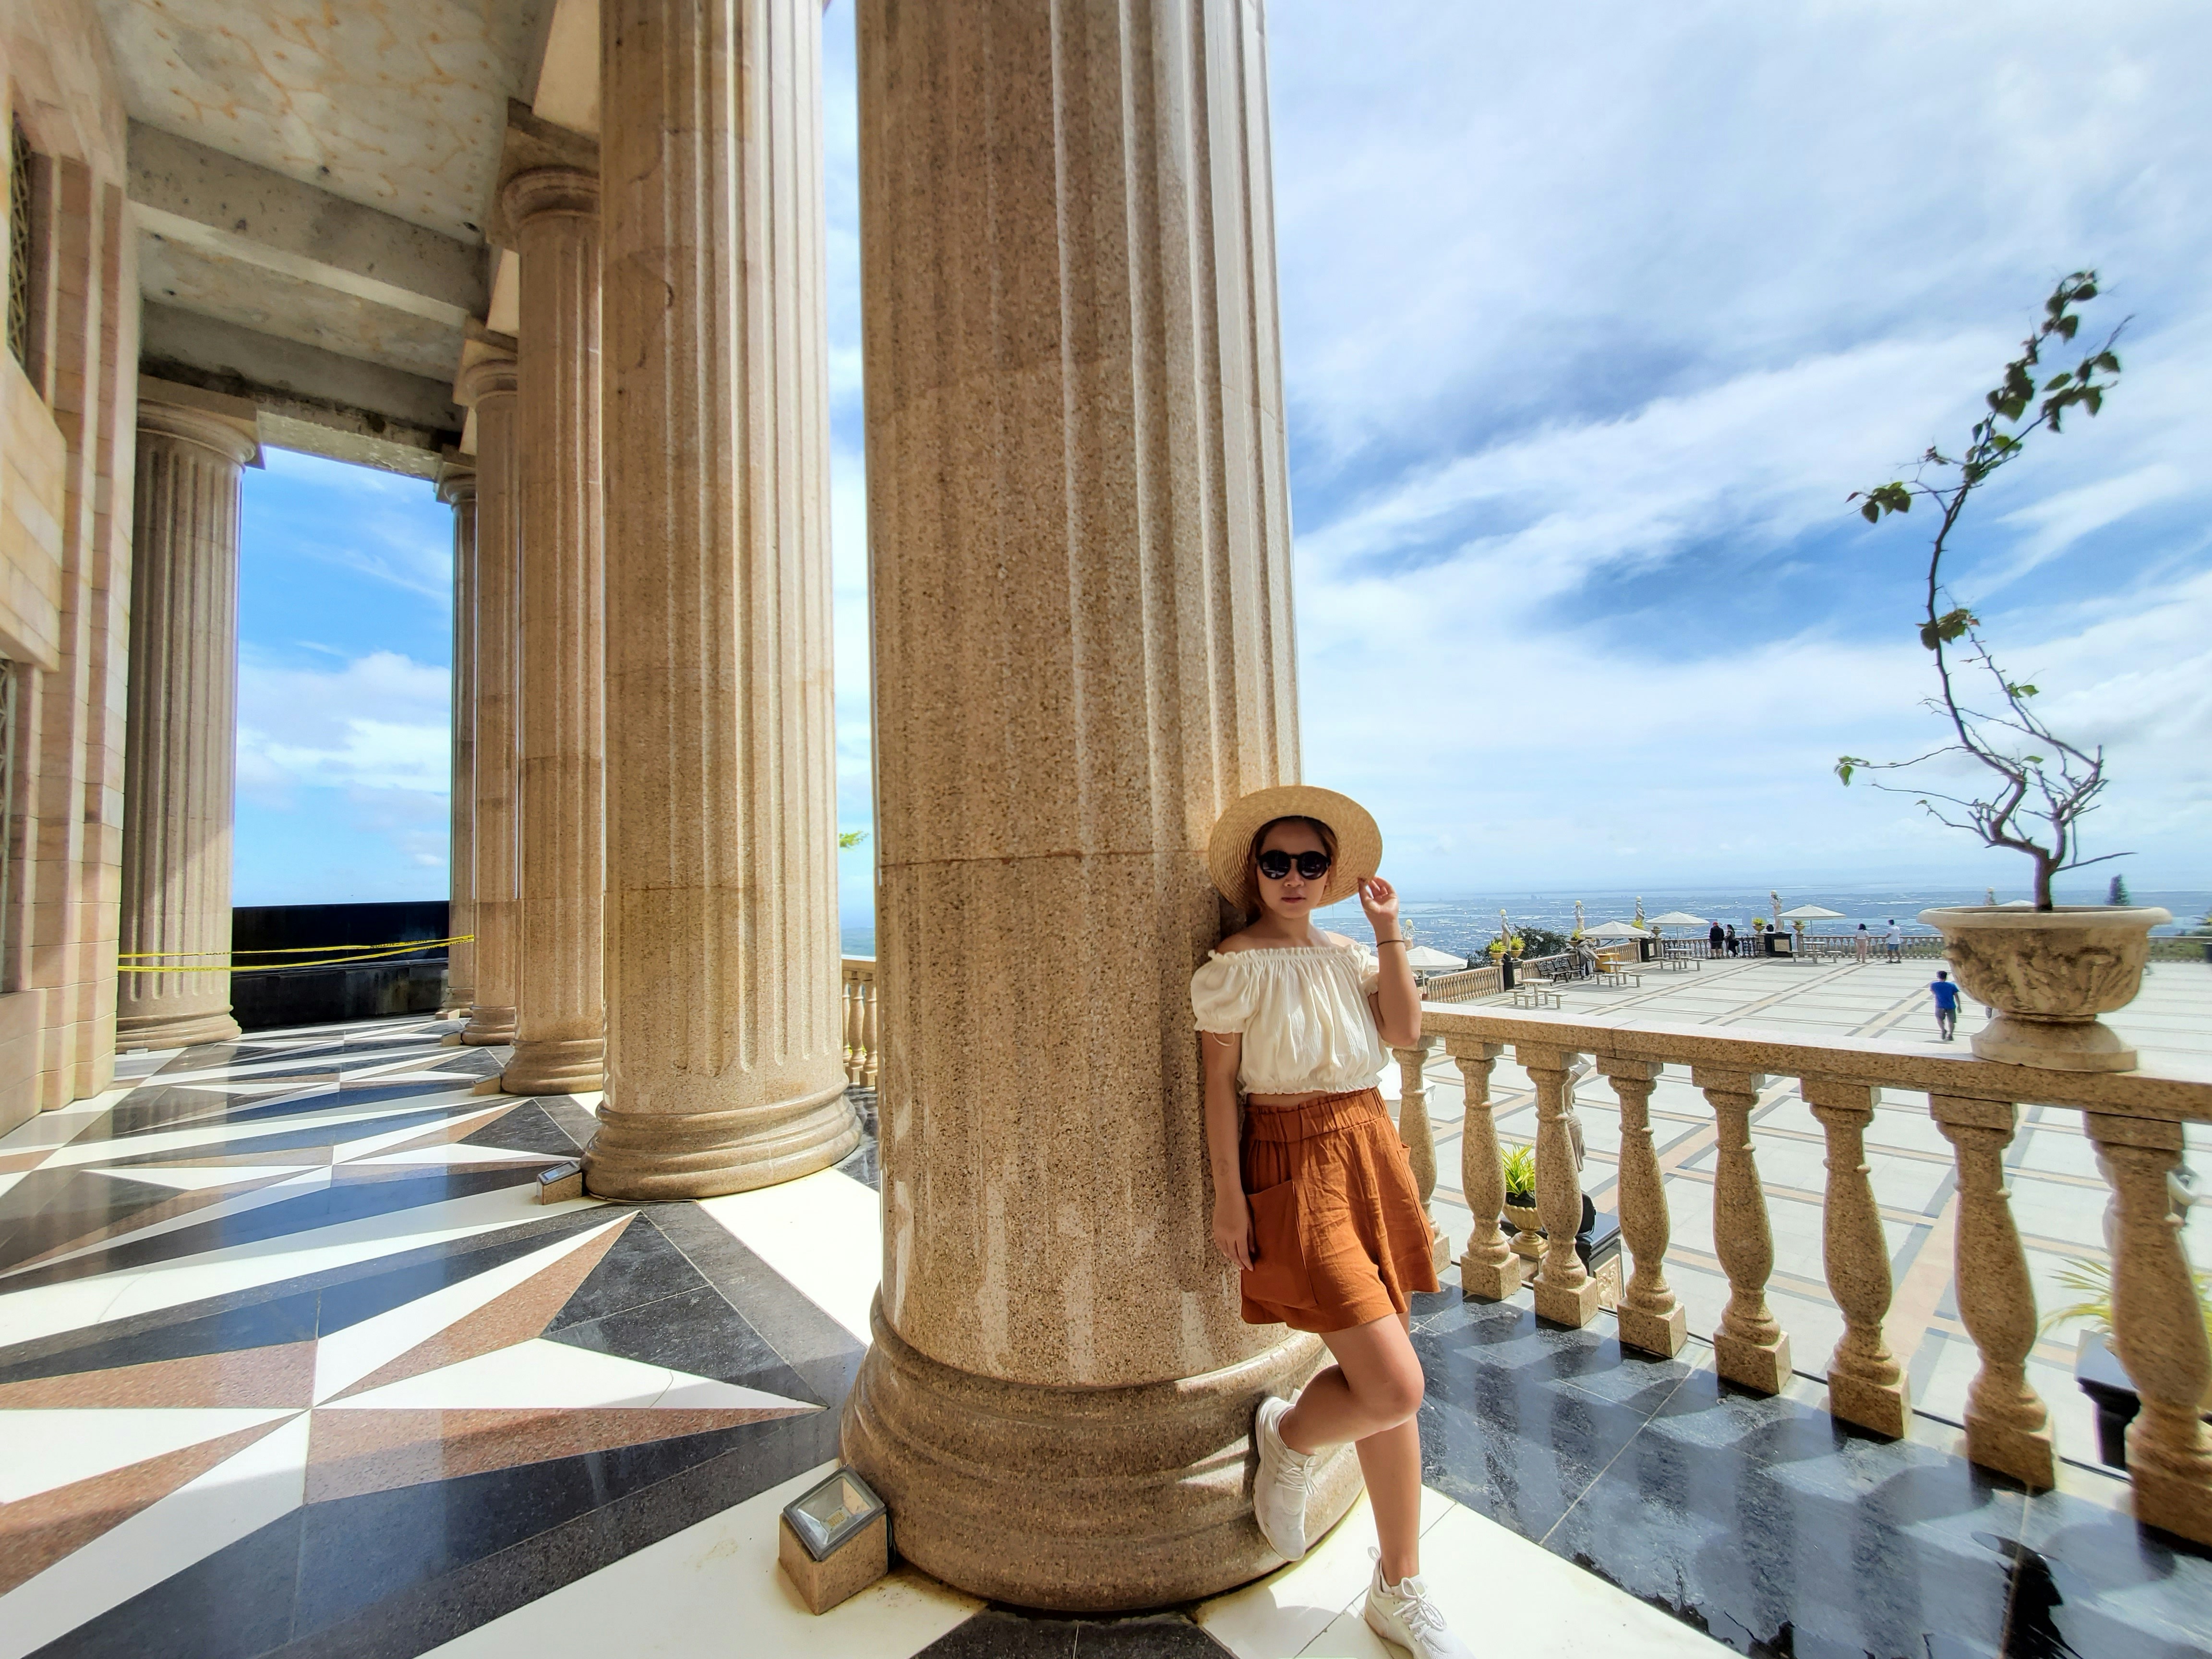 great photo recipe,how to photograph girl at the temple; woman leaning back on pillar during day